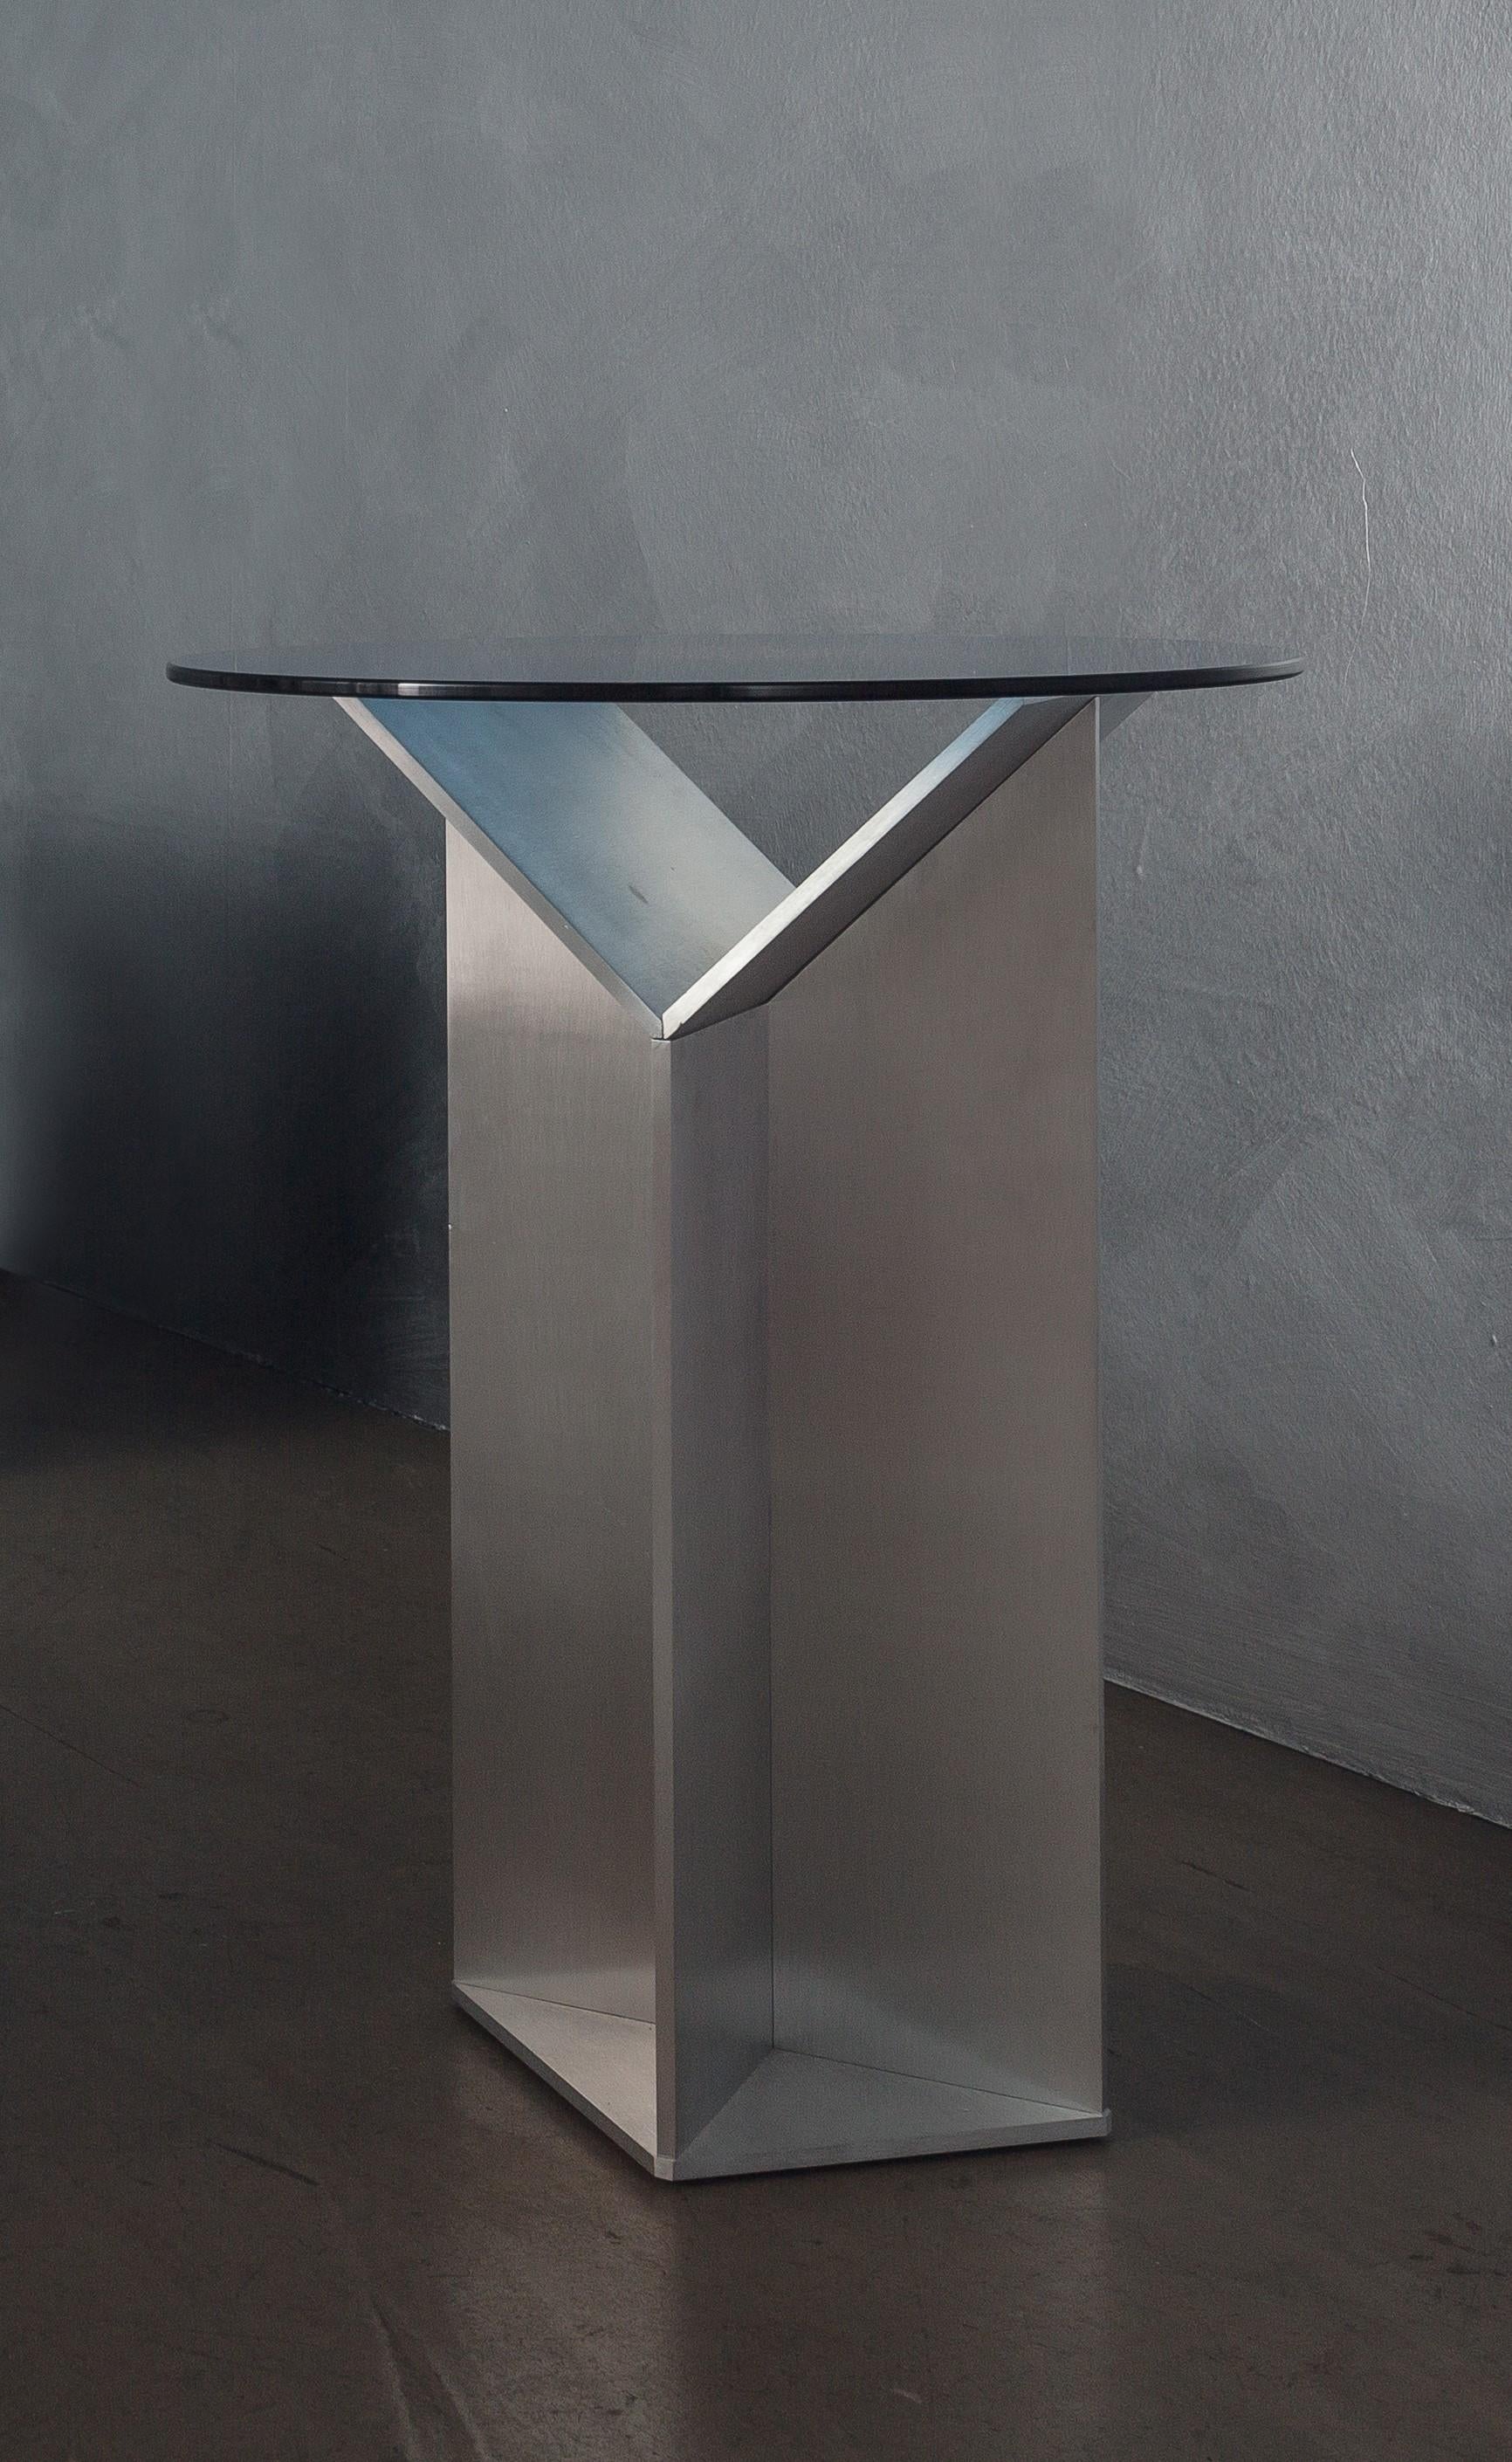 Pinac side table by Oeuffice
Edition: 12 + 2AP
2015
Materials: Aluminum, tempered glass
Dimensions: L 50 x W 50 x H 70 cm

It is possible to customize the objects with different finishes of aluminium (brushed, oxidized red, oxidized blue and